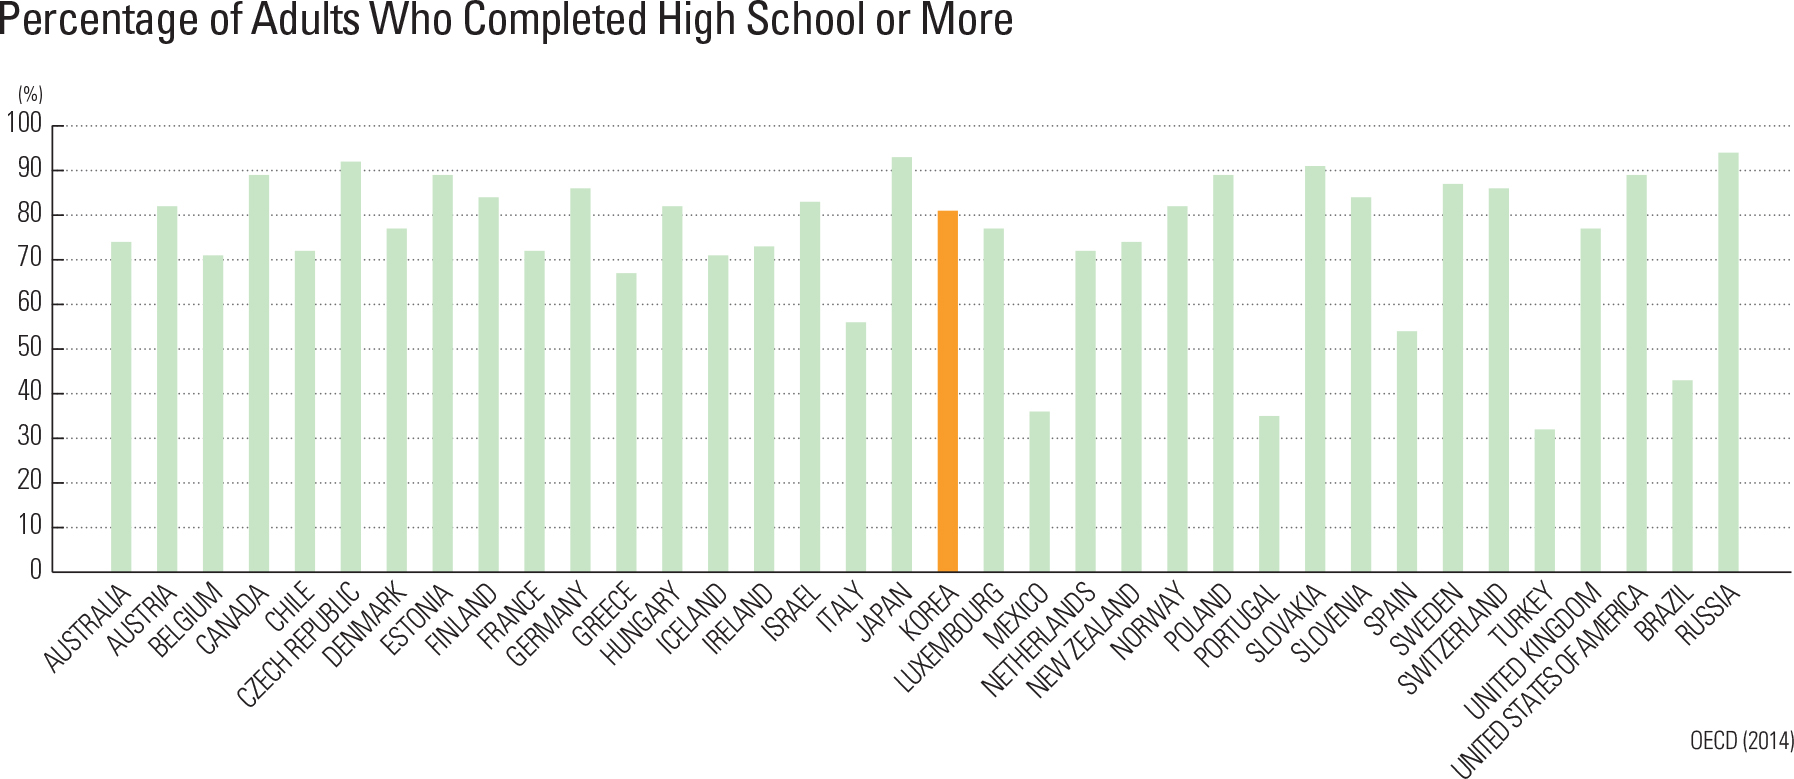 Percentage of Adults Who Completed High School or More